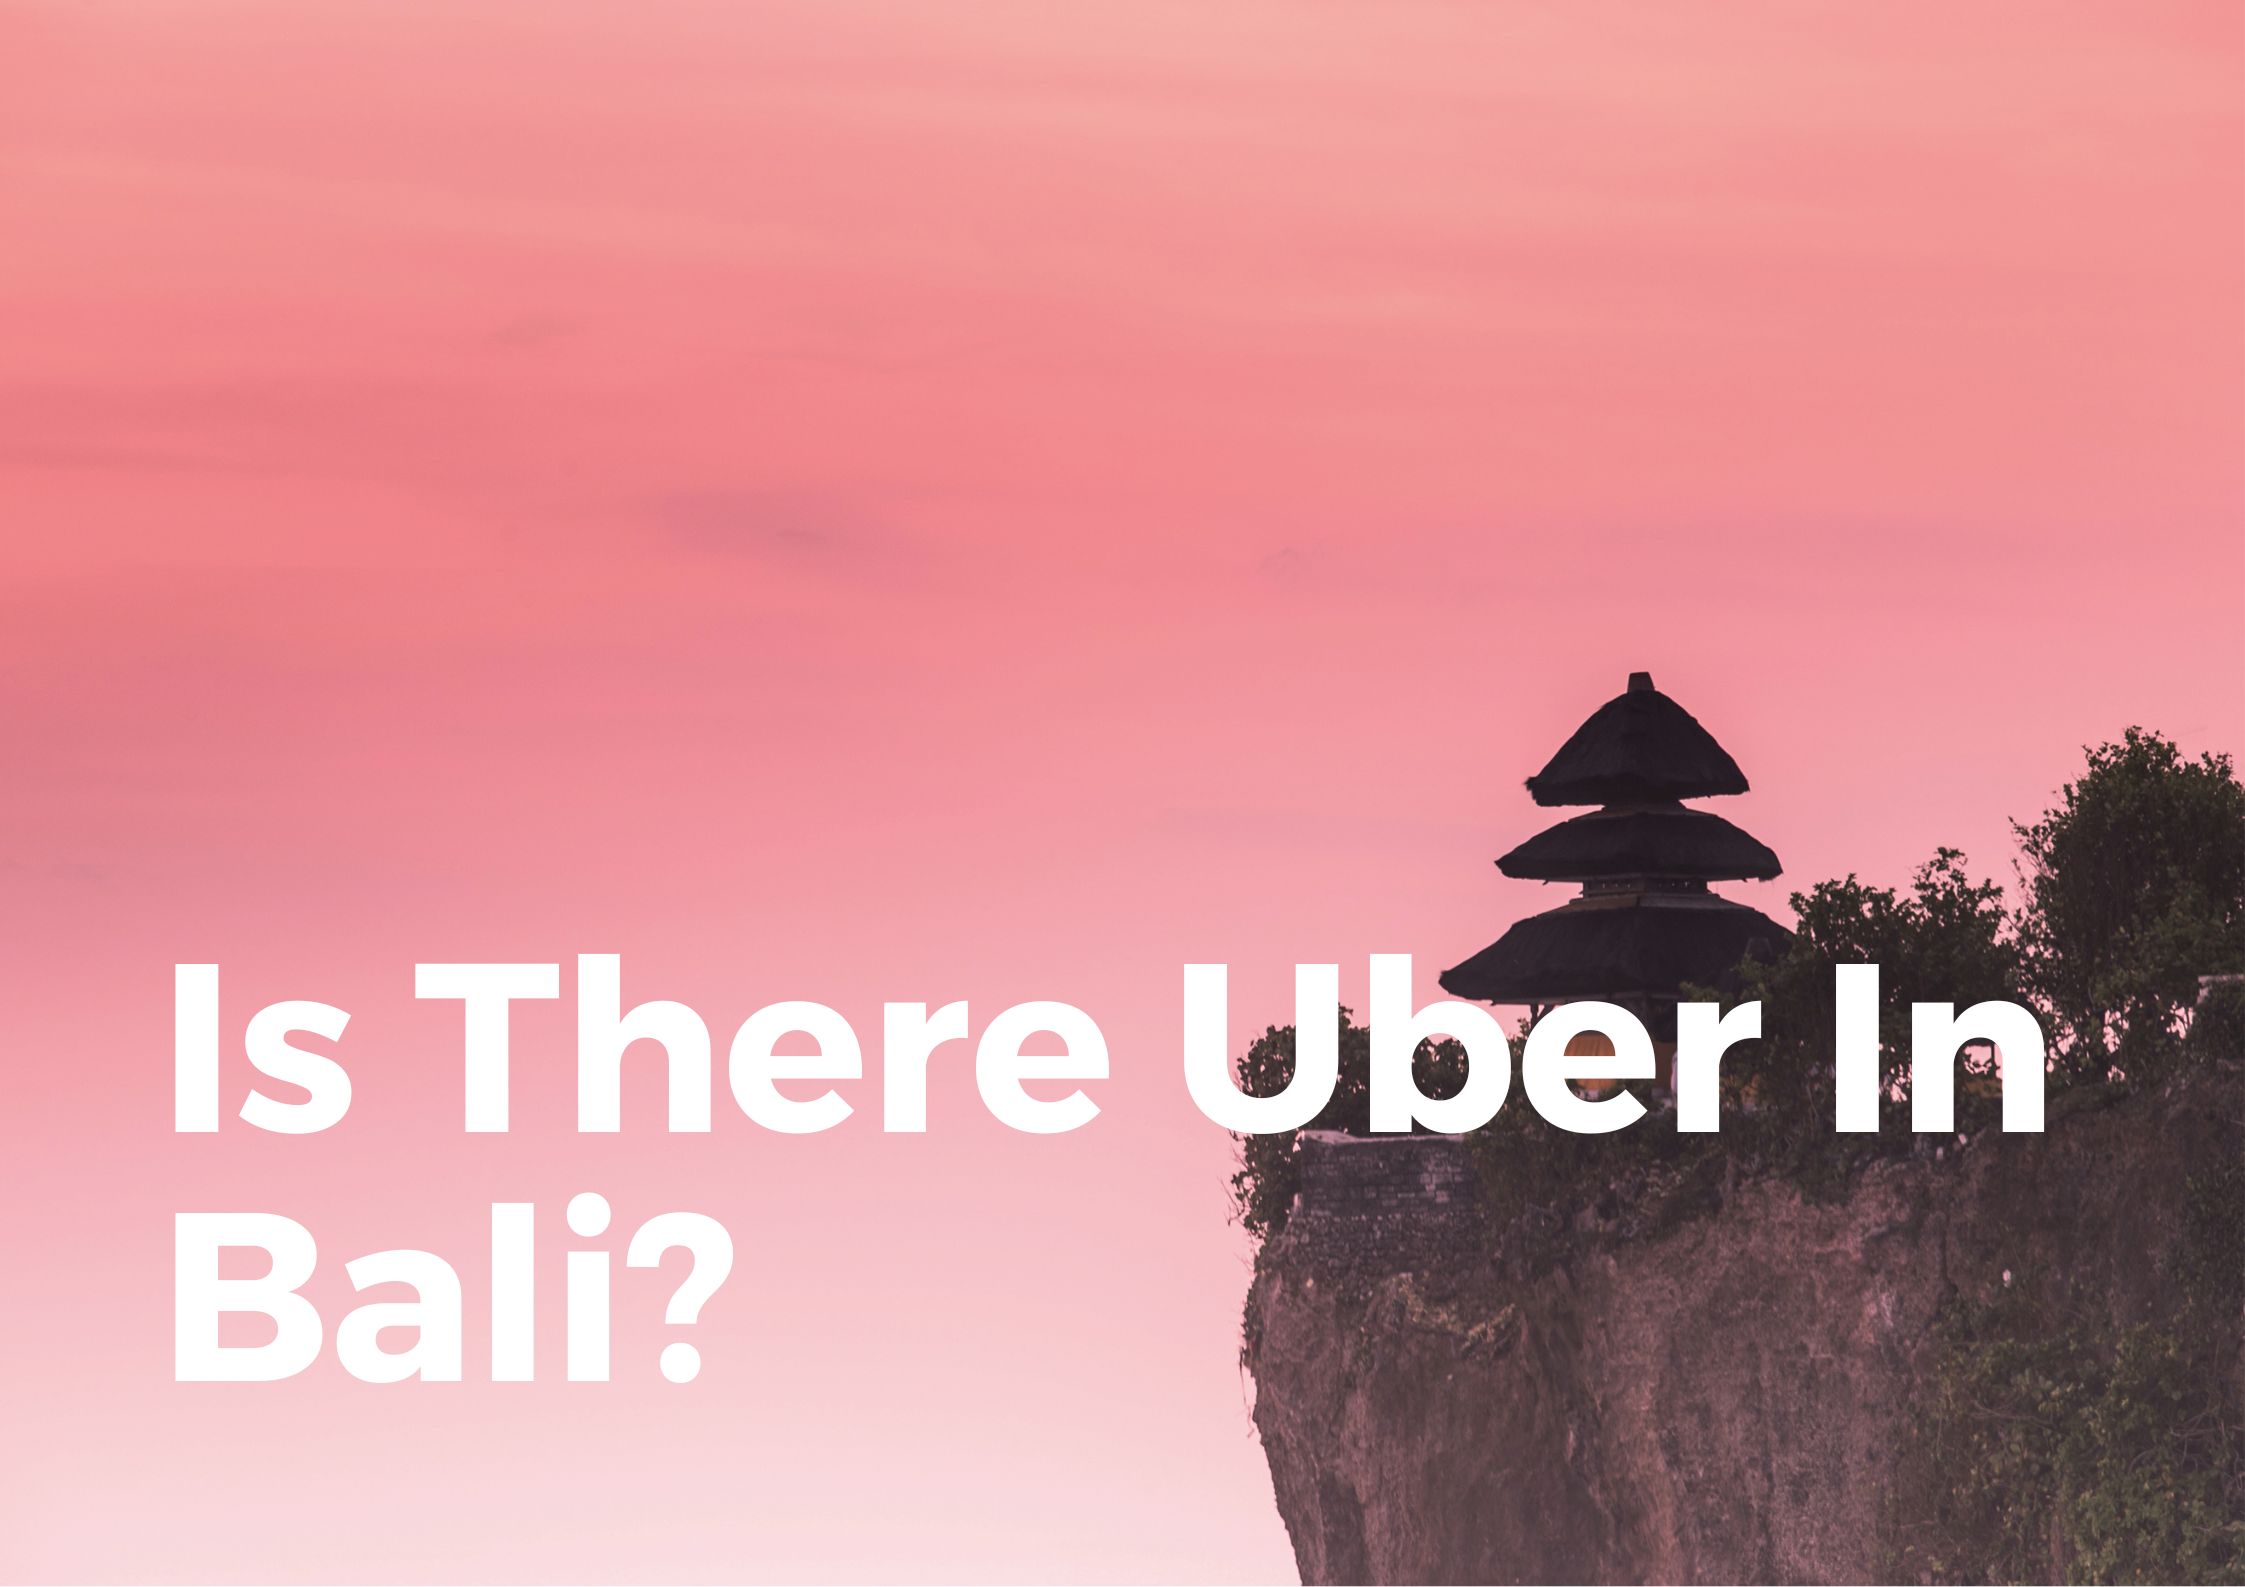 Is there uber in Bali?